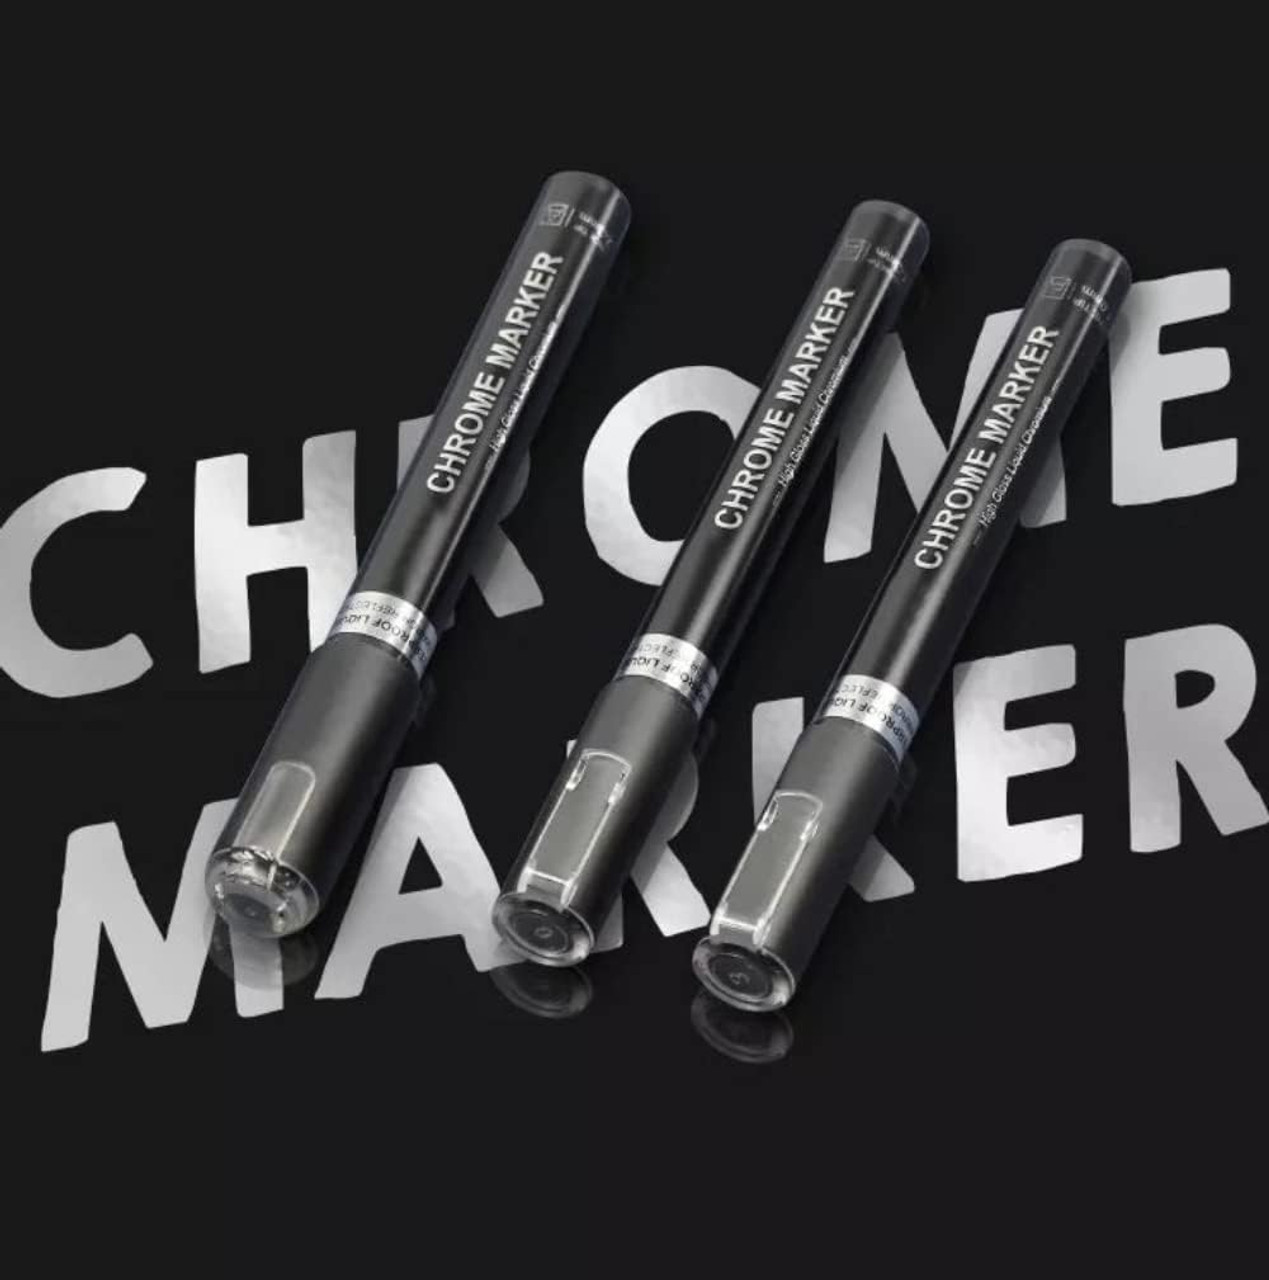 ZOET Chrome Marker Paint Pen - Choose from three sizes